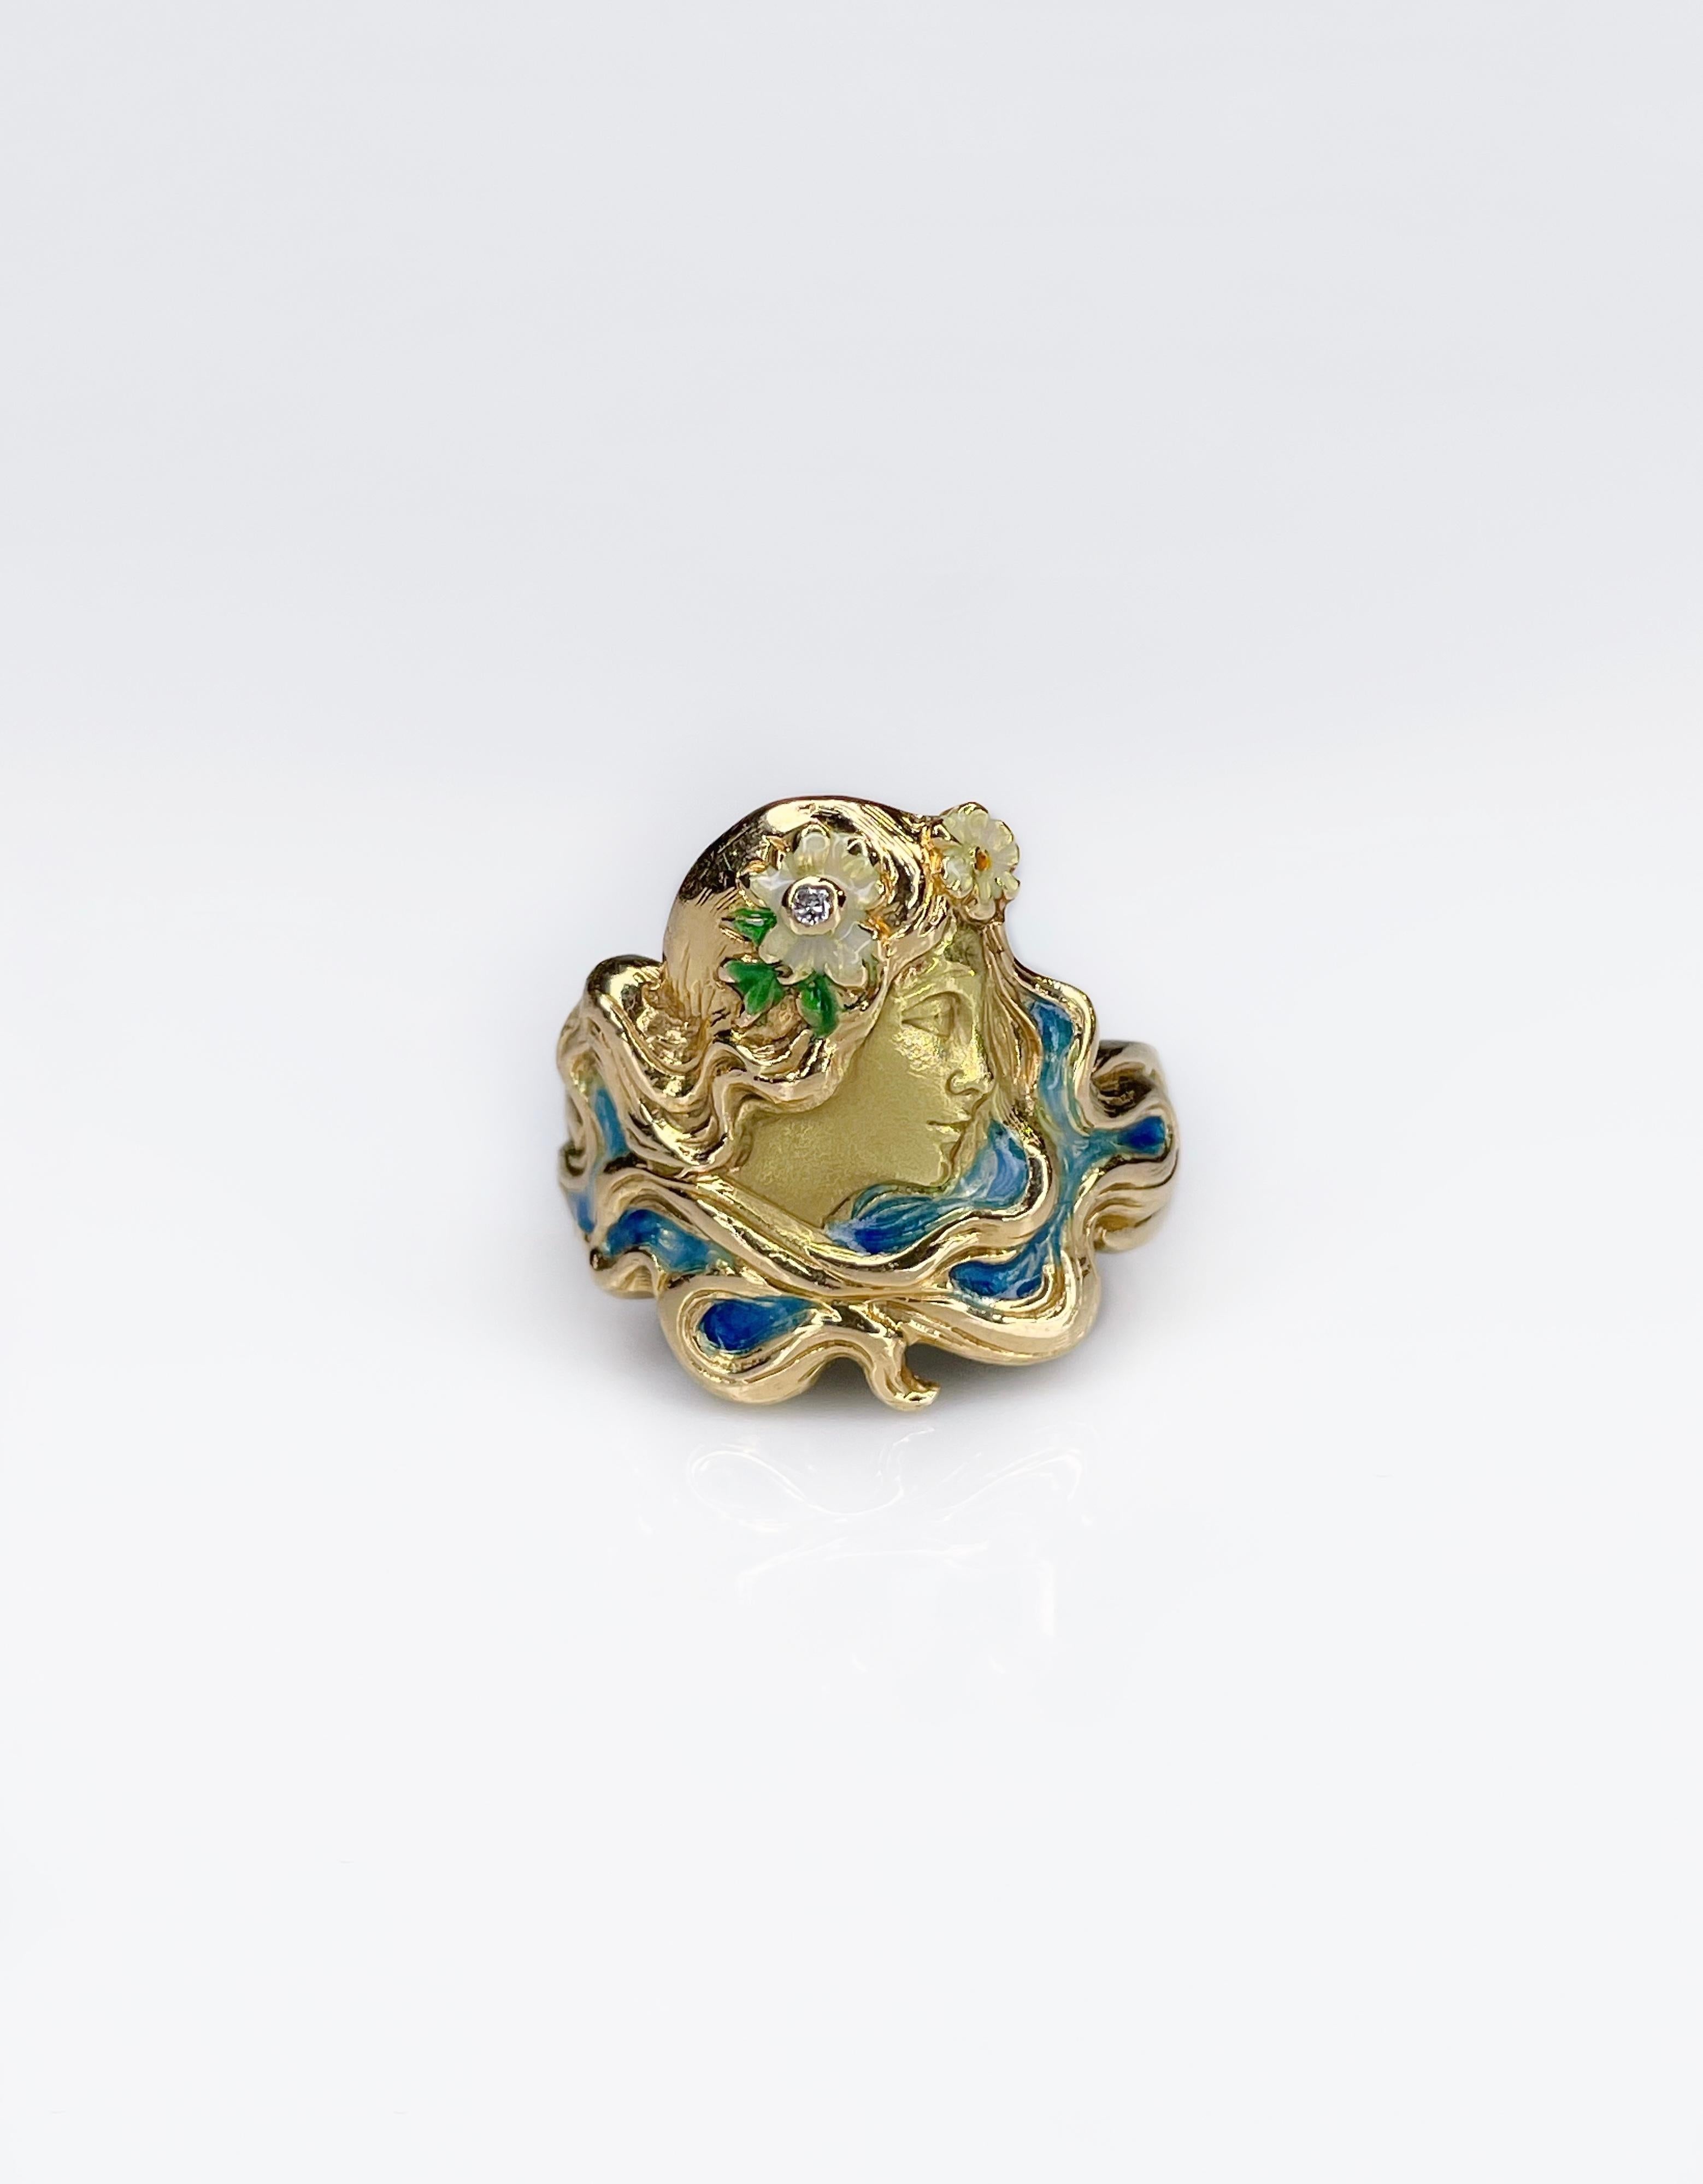 This rare Art Nouveau daisy goddess ring has been crafted in 18K yellow gold. Period is the beginning of XX century. This stuning ring is decorated with blue, green and white colored enamel. Symbolic Daisy Goddess wears a flower with a brilliant-cut